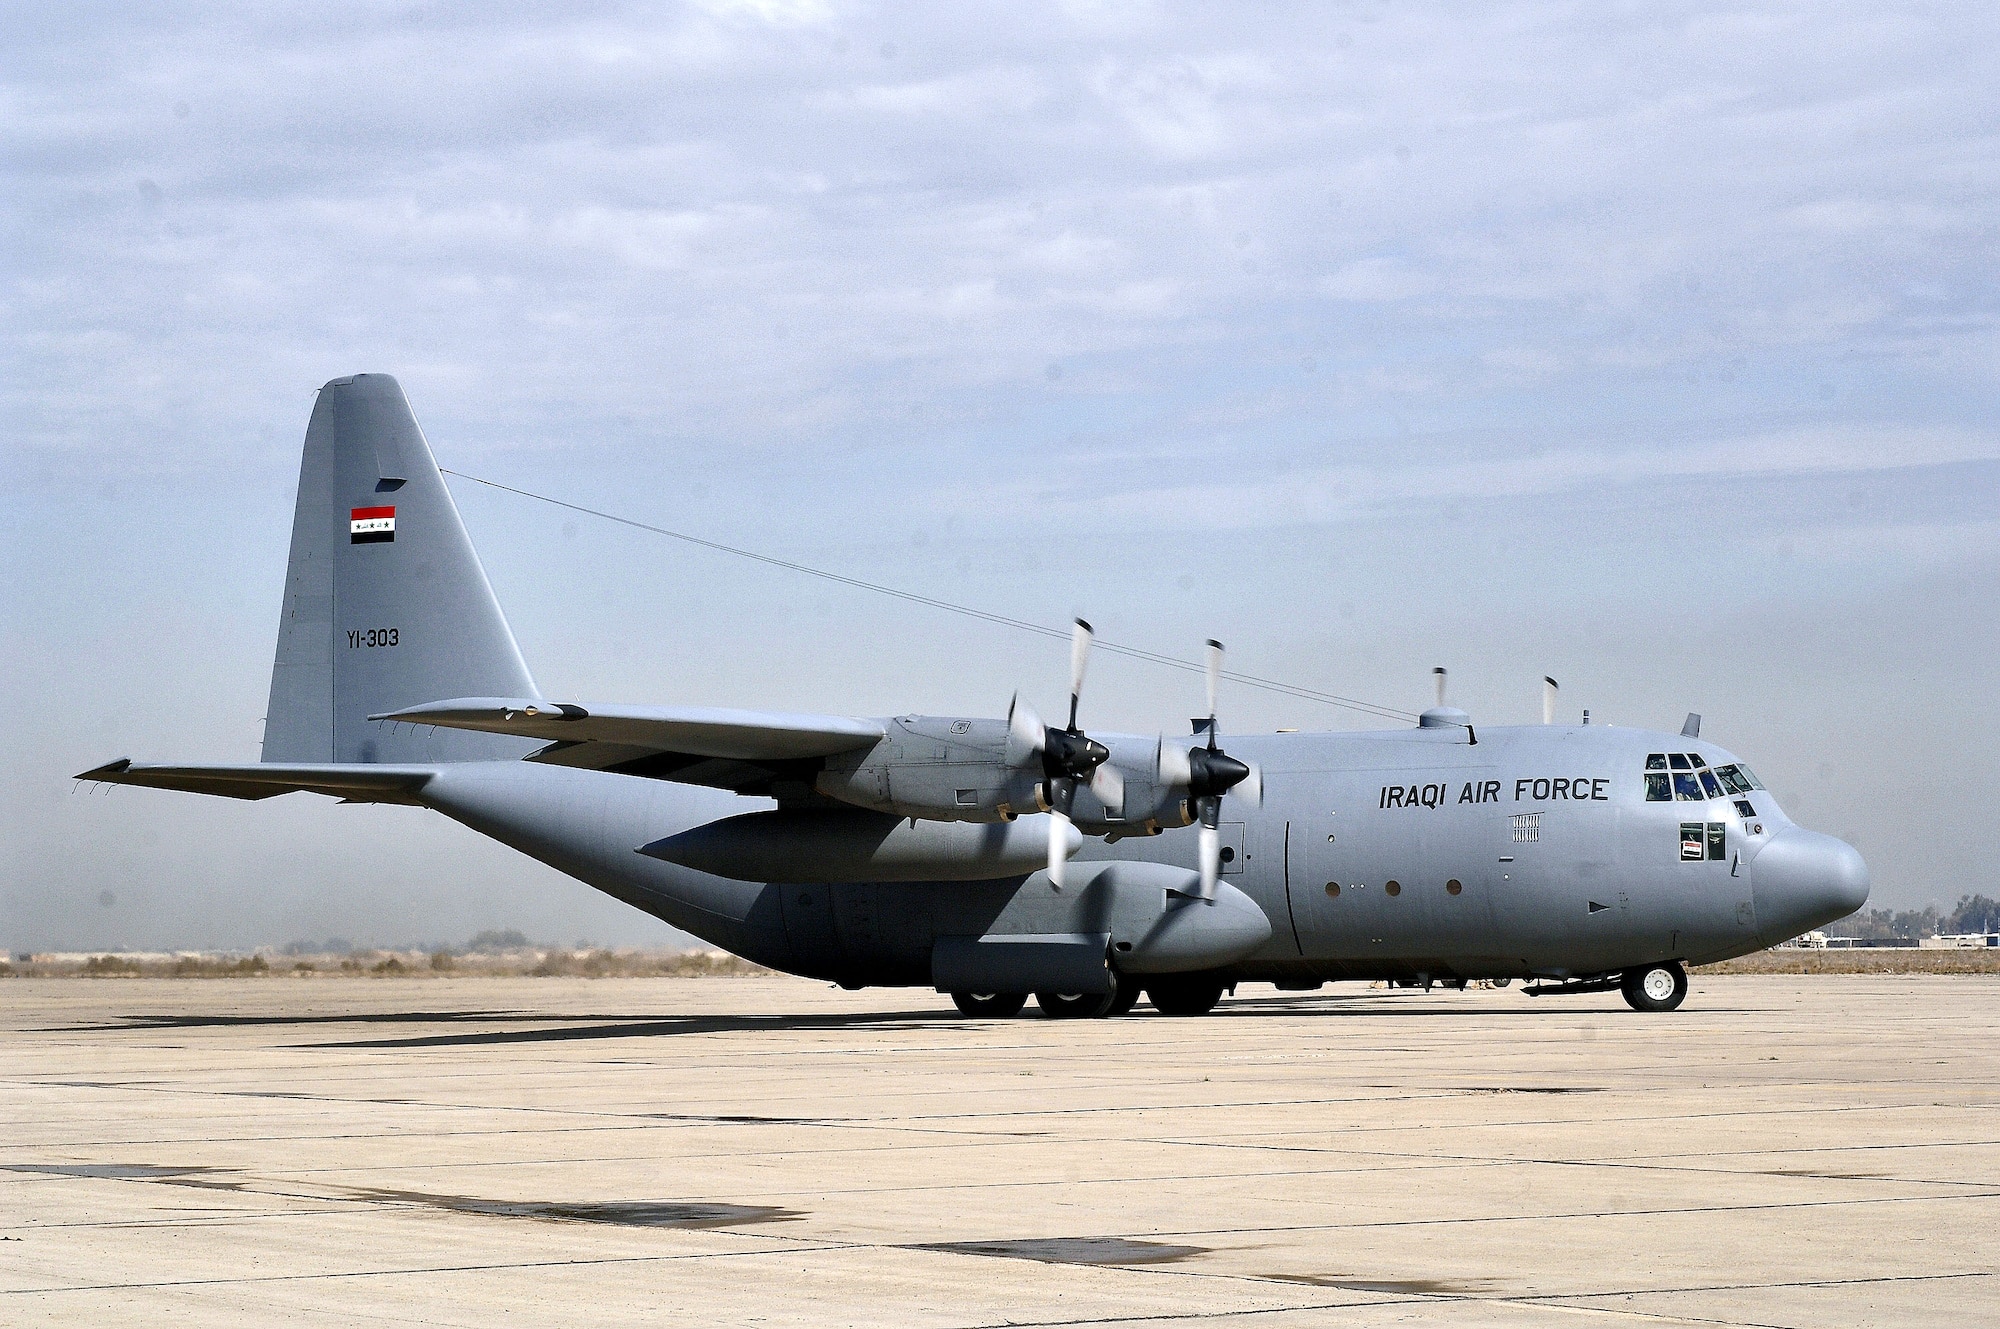 An Iraqi C-130 Hercules taxis onto the runway shared by Baghdad International Airport and New Al Muthana Air Base, Iraq, Wednesday, Feb. 22, 2006. The aircraft, YI-303, is one of three cargo aircraft at the new air base. (U.S. Air Force photo/Master Sgt. Lance Cheung) 